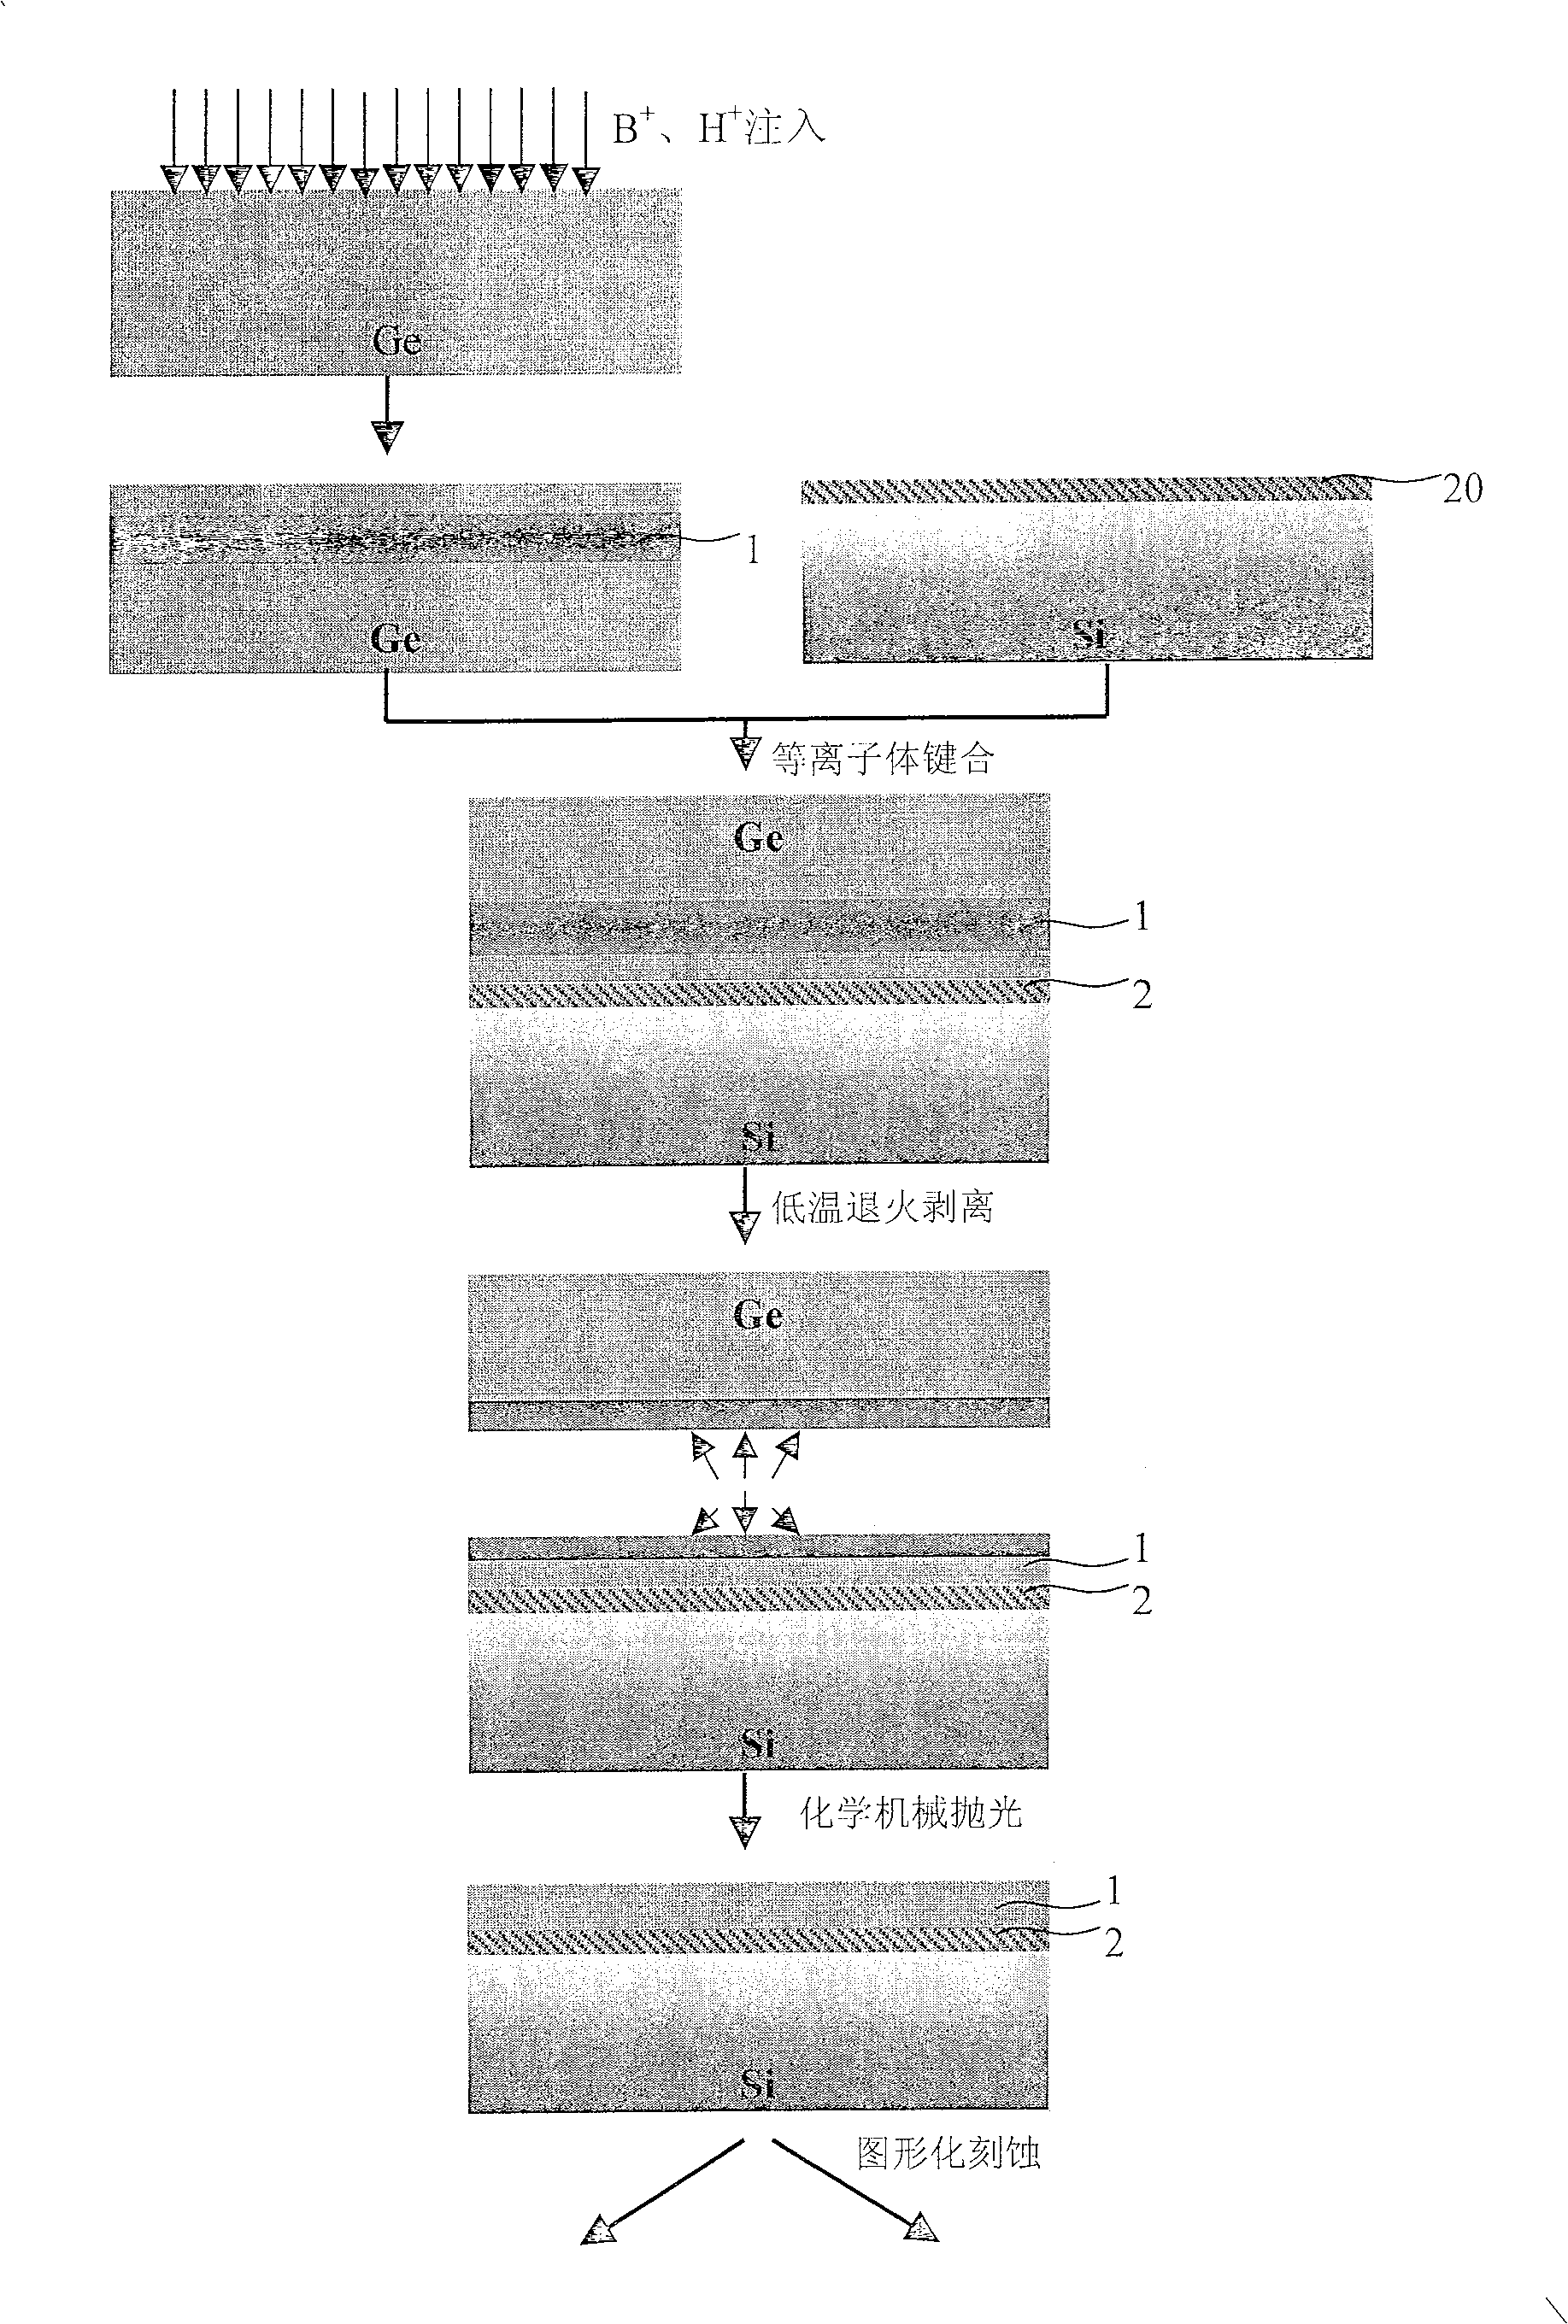 Germanium-painting structure for insulating layer of mixed graphical monocrystaline silicon as well as method and application thereof